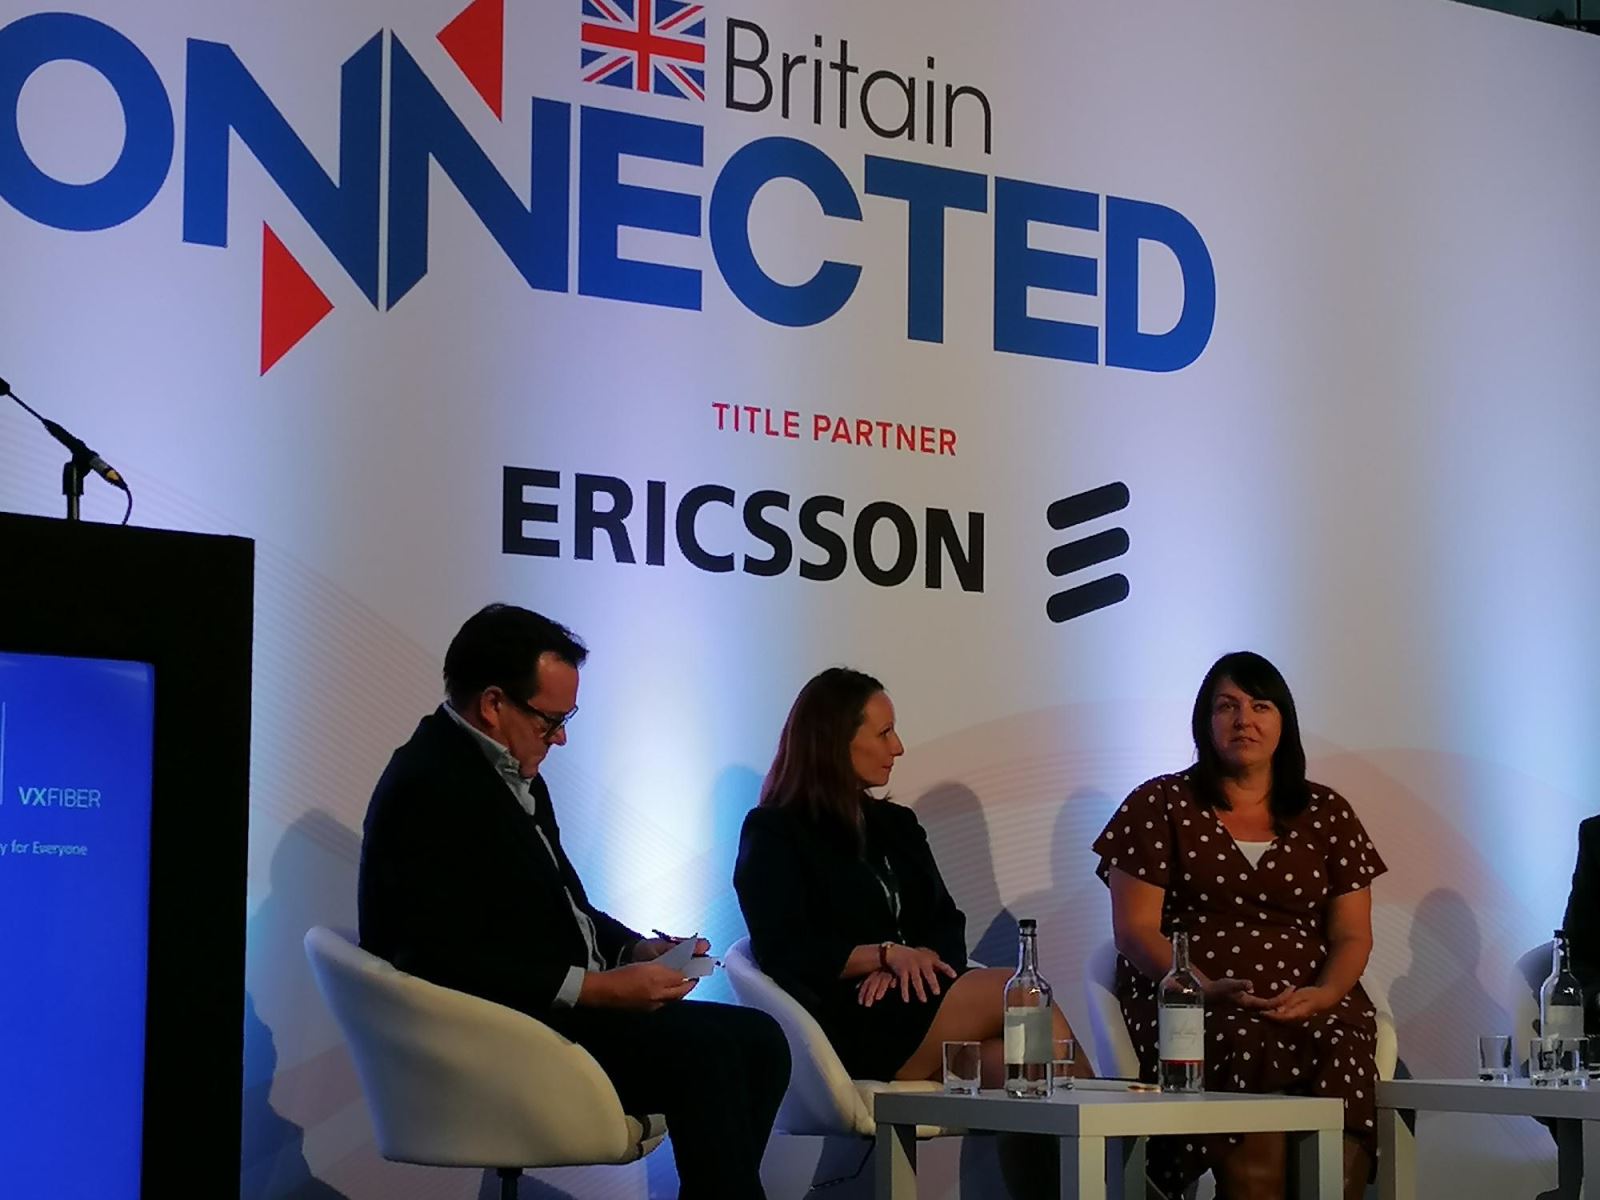 Lynne on her panel at Connected Britain